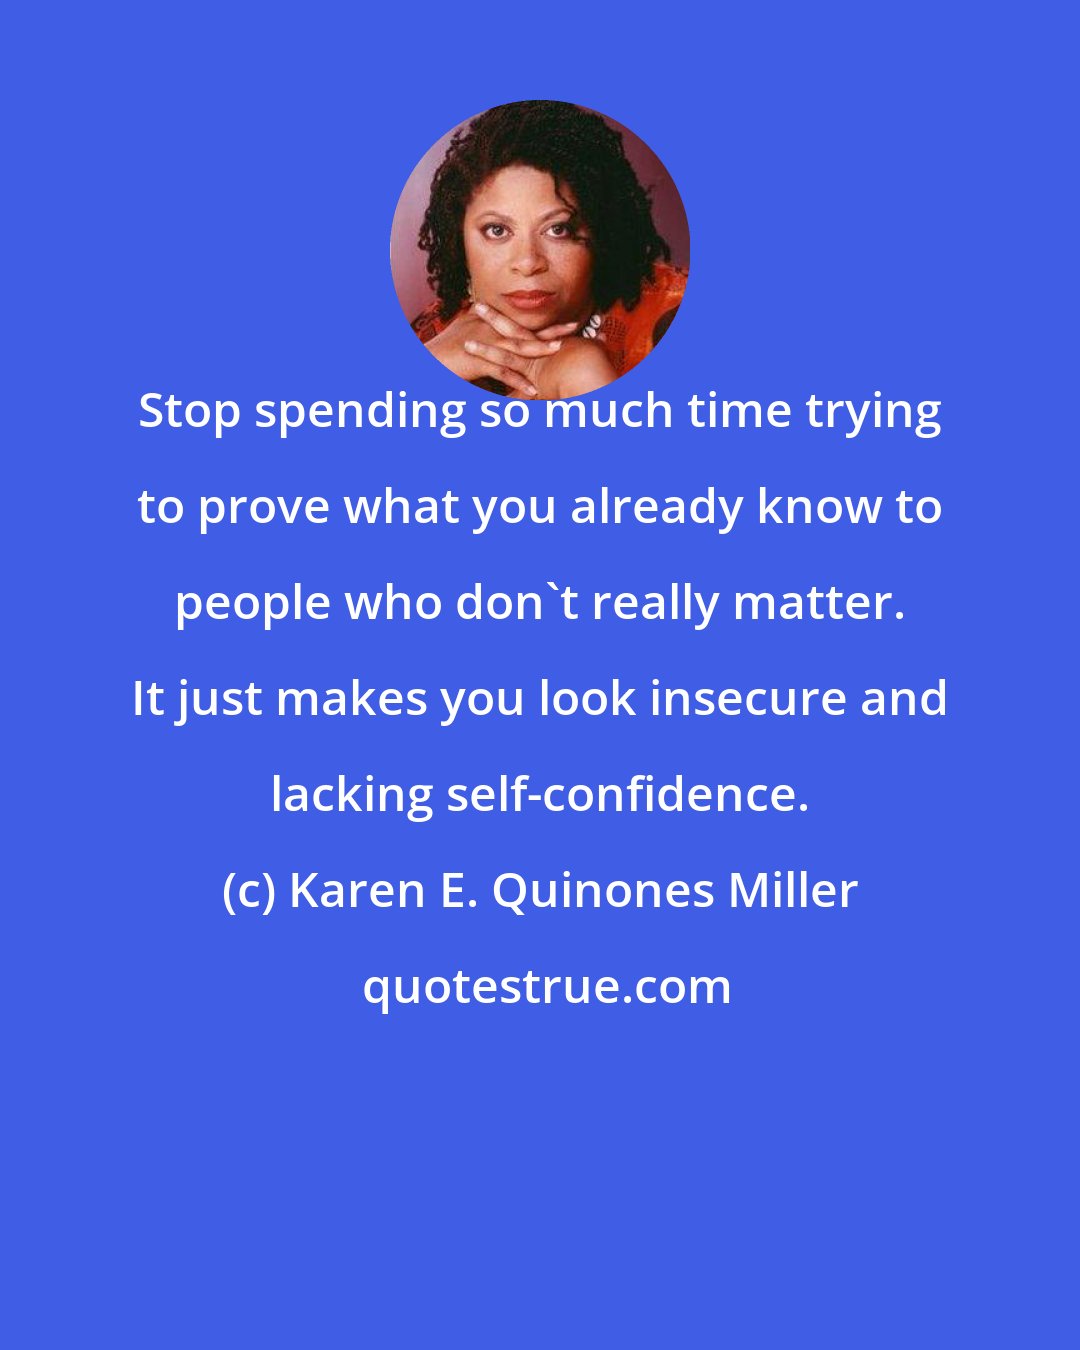 Karen E. Quinones Miller: Stop spending so much time trying to prove what you already know to people who don't really matter. It just makes you look insecure and lacking self-confidence.